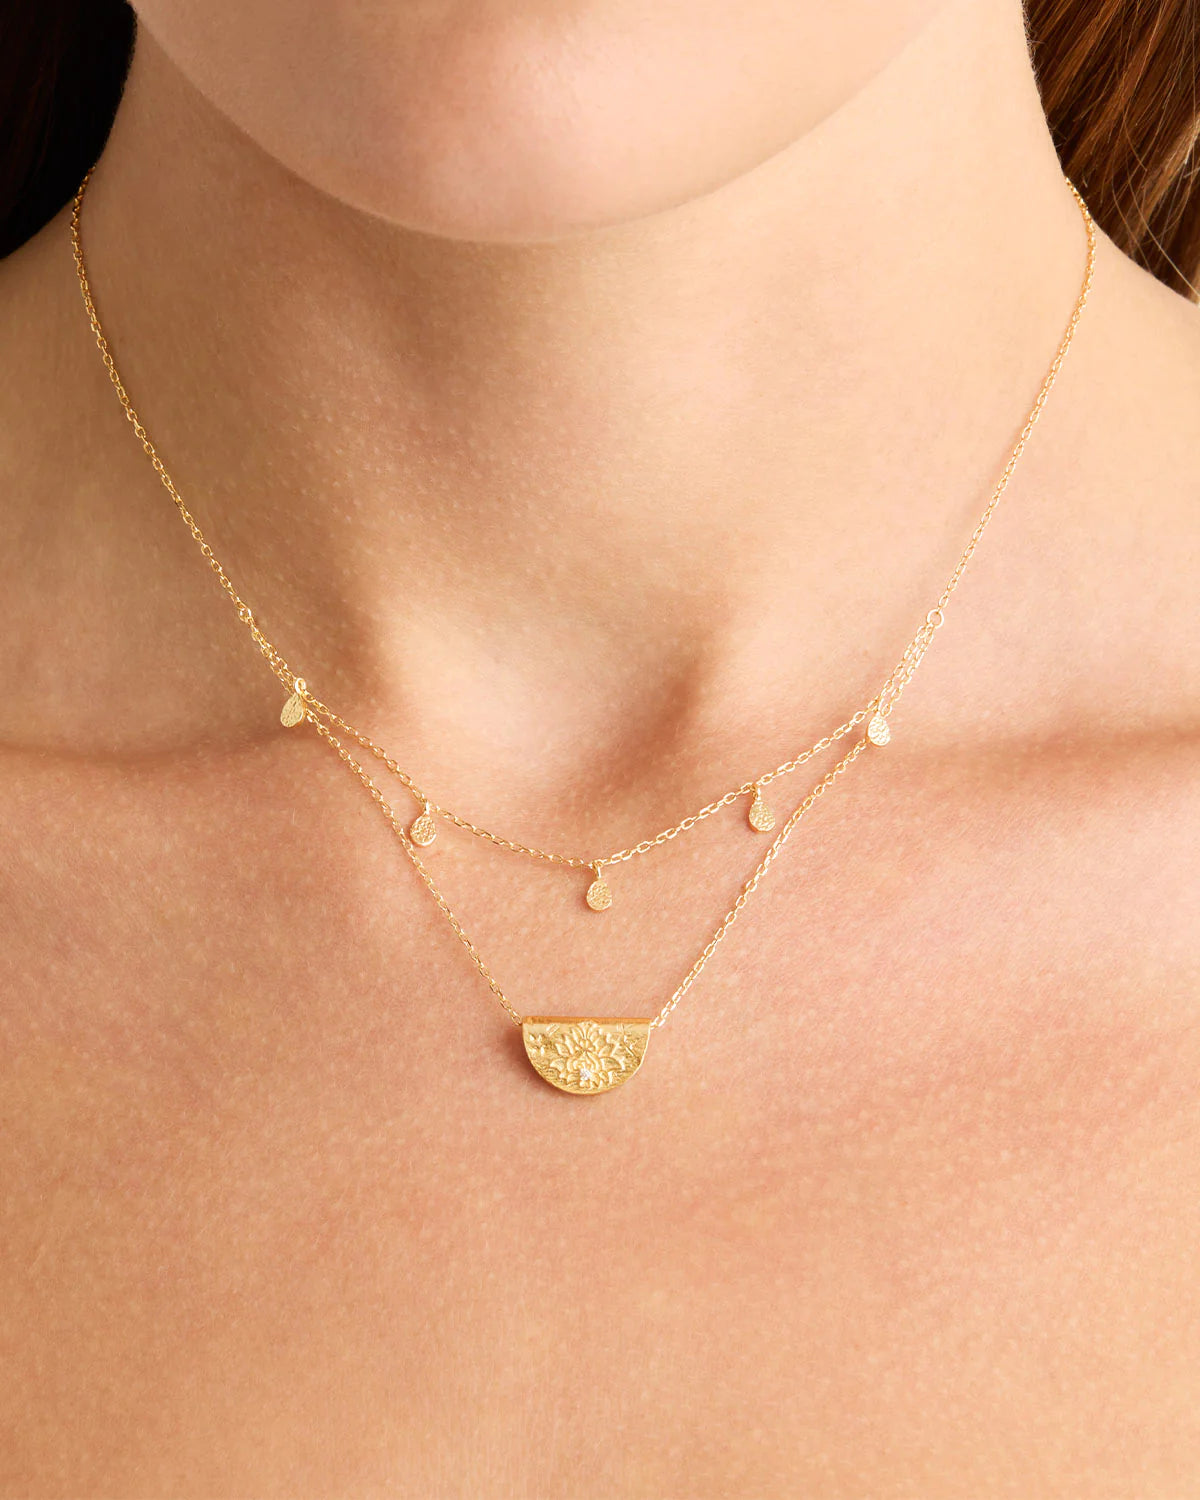 By Charlotte - Blessed Lotus Necklace 18k Gold Vermeil